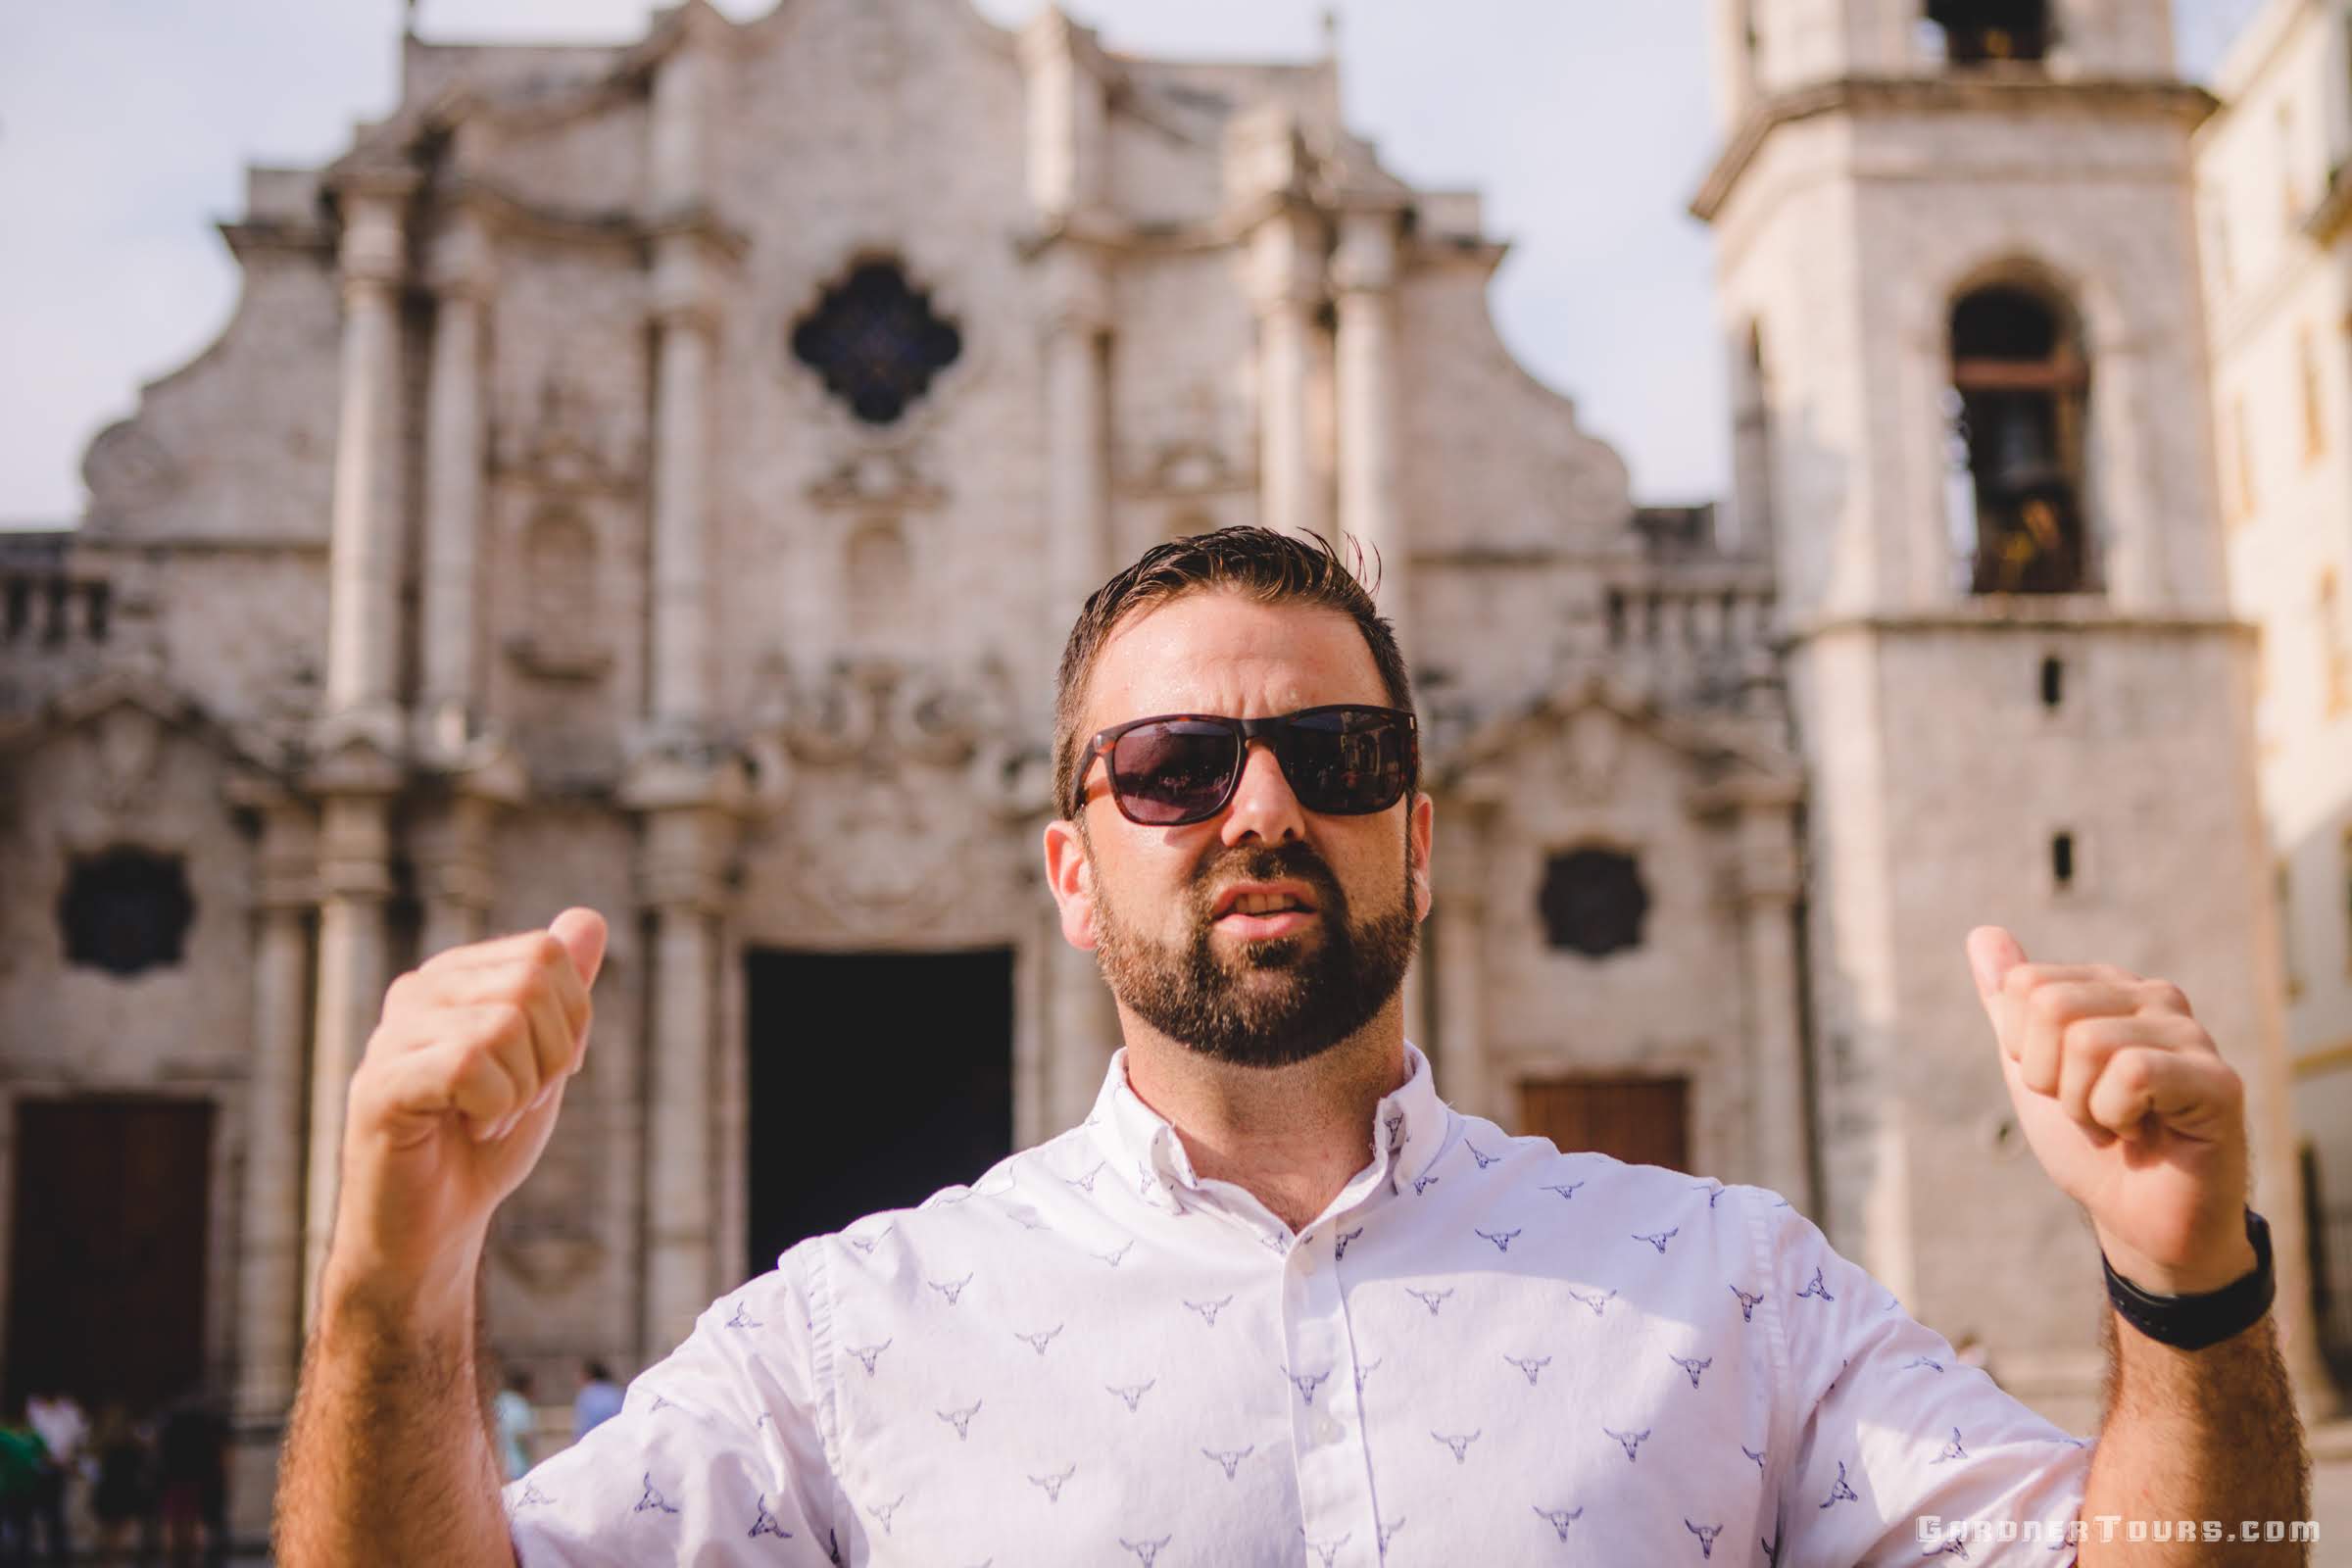 Gardner Tours Owner and Tour Guide Colby Gardner talking about the Cathedral of Havana, behind him, in Old Havana, Cuba